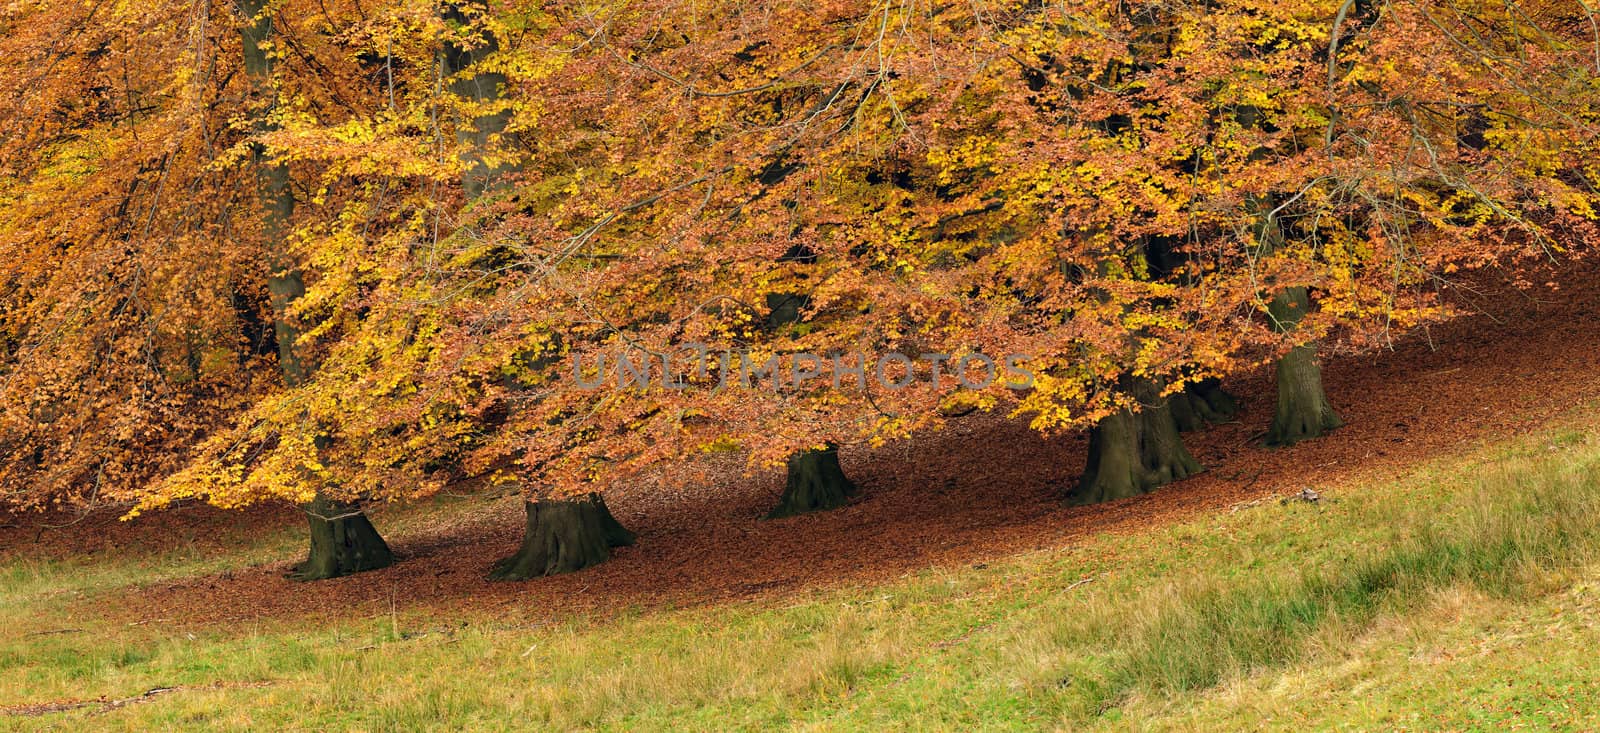 Trees in autumn with yellow, red and orange leaves